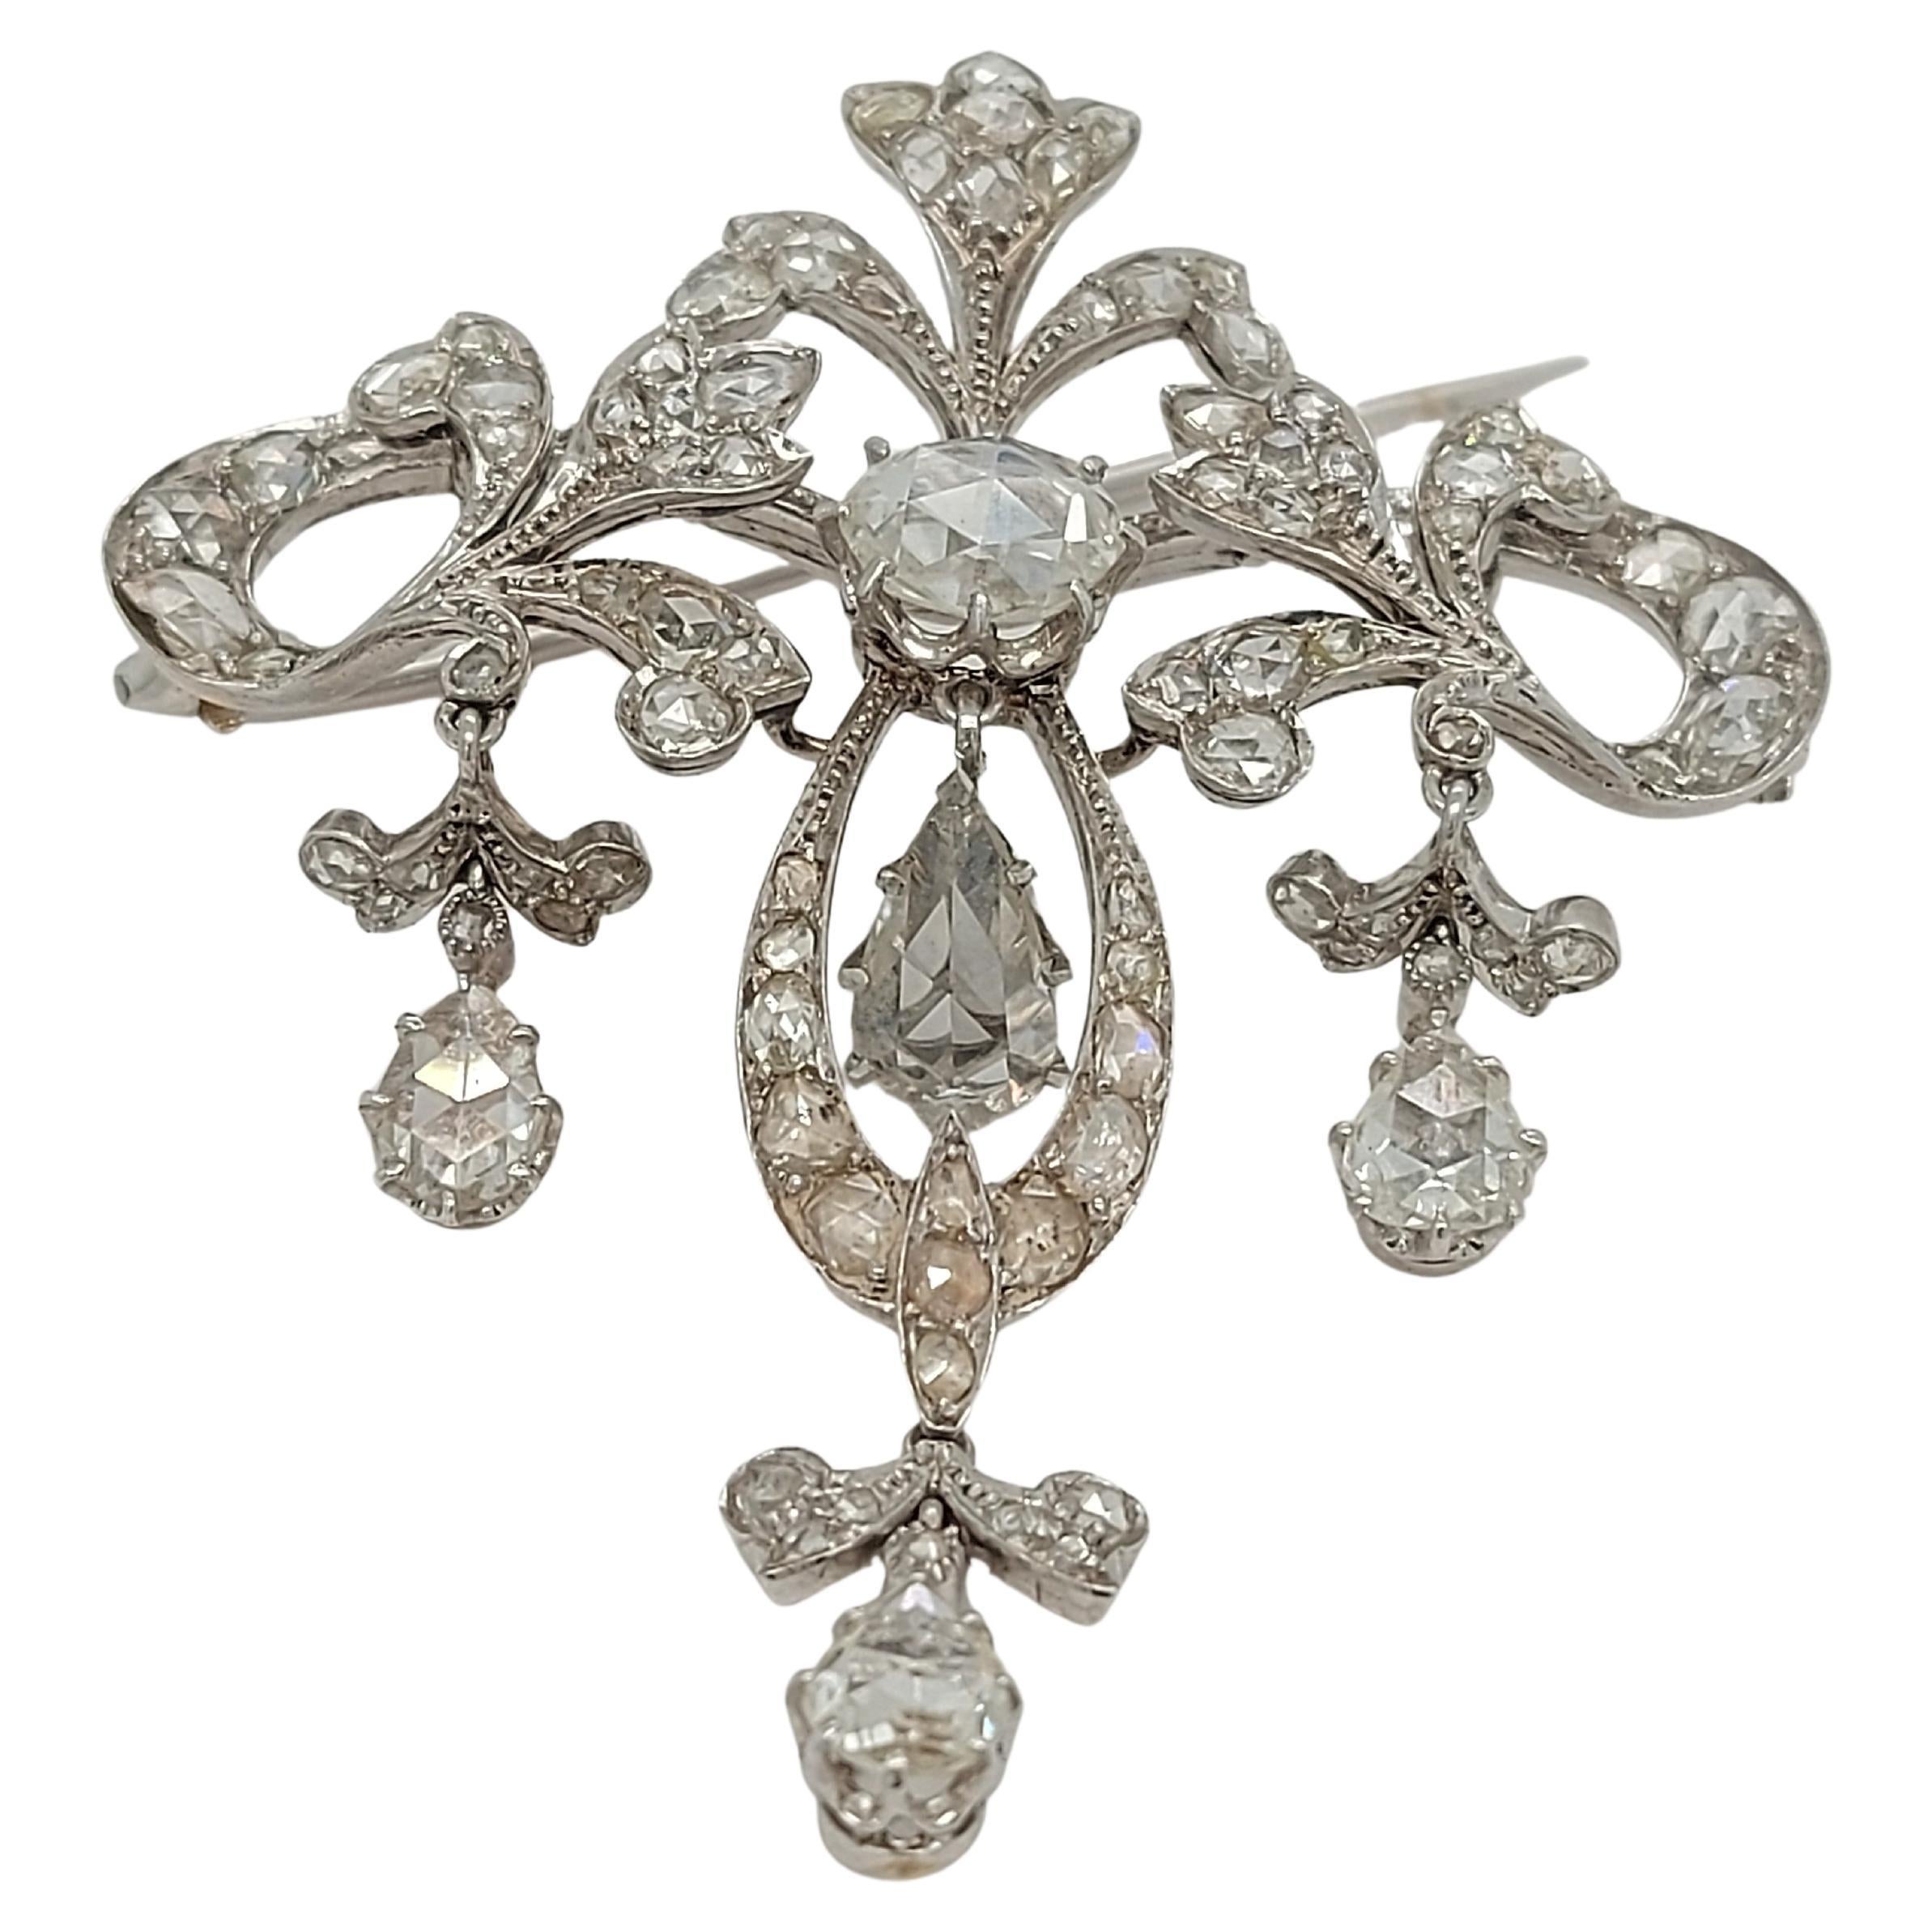 Magnificent Vintage Platinum  Brooch / Necklace  with Rose Cut Diamonds
Pin can be removed and possibility to put chain and wear it as necklace or pendant.

Diamonds: Rose cut diamonds

Material: 18kt White gold

Measurements: 47.5mm x 56.5mm x